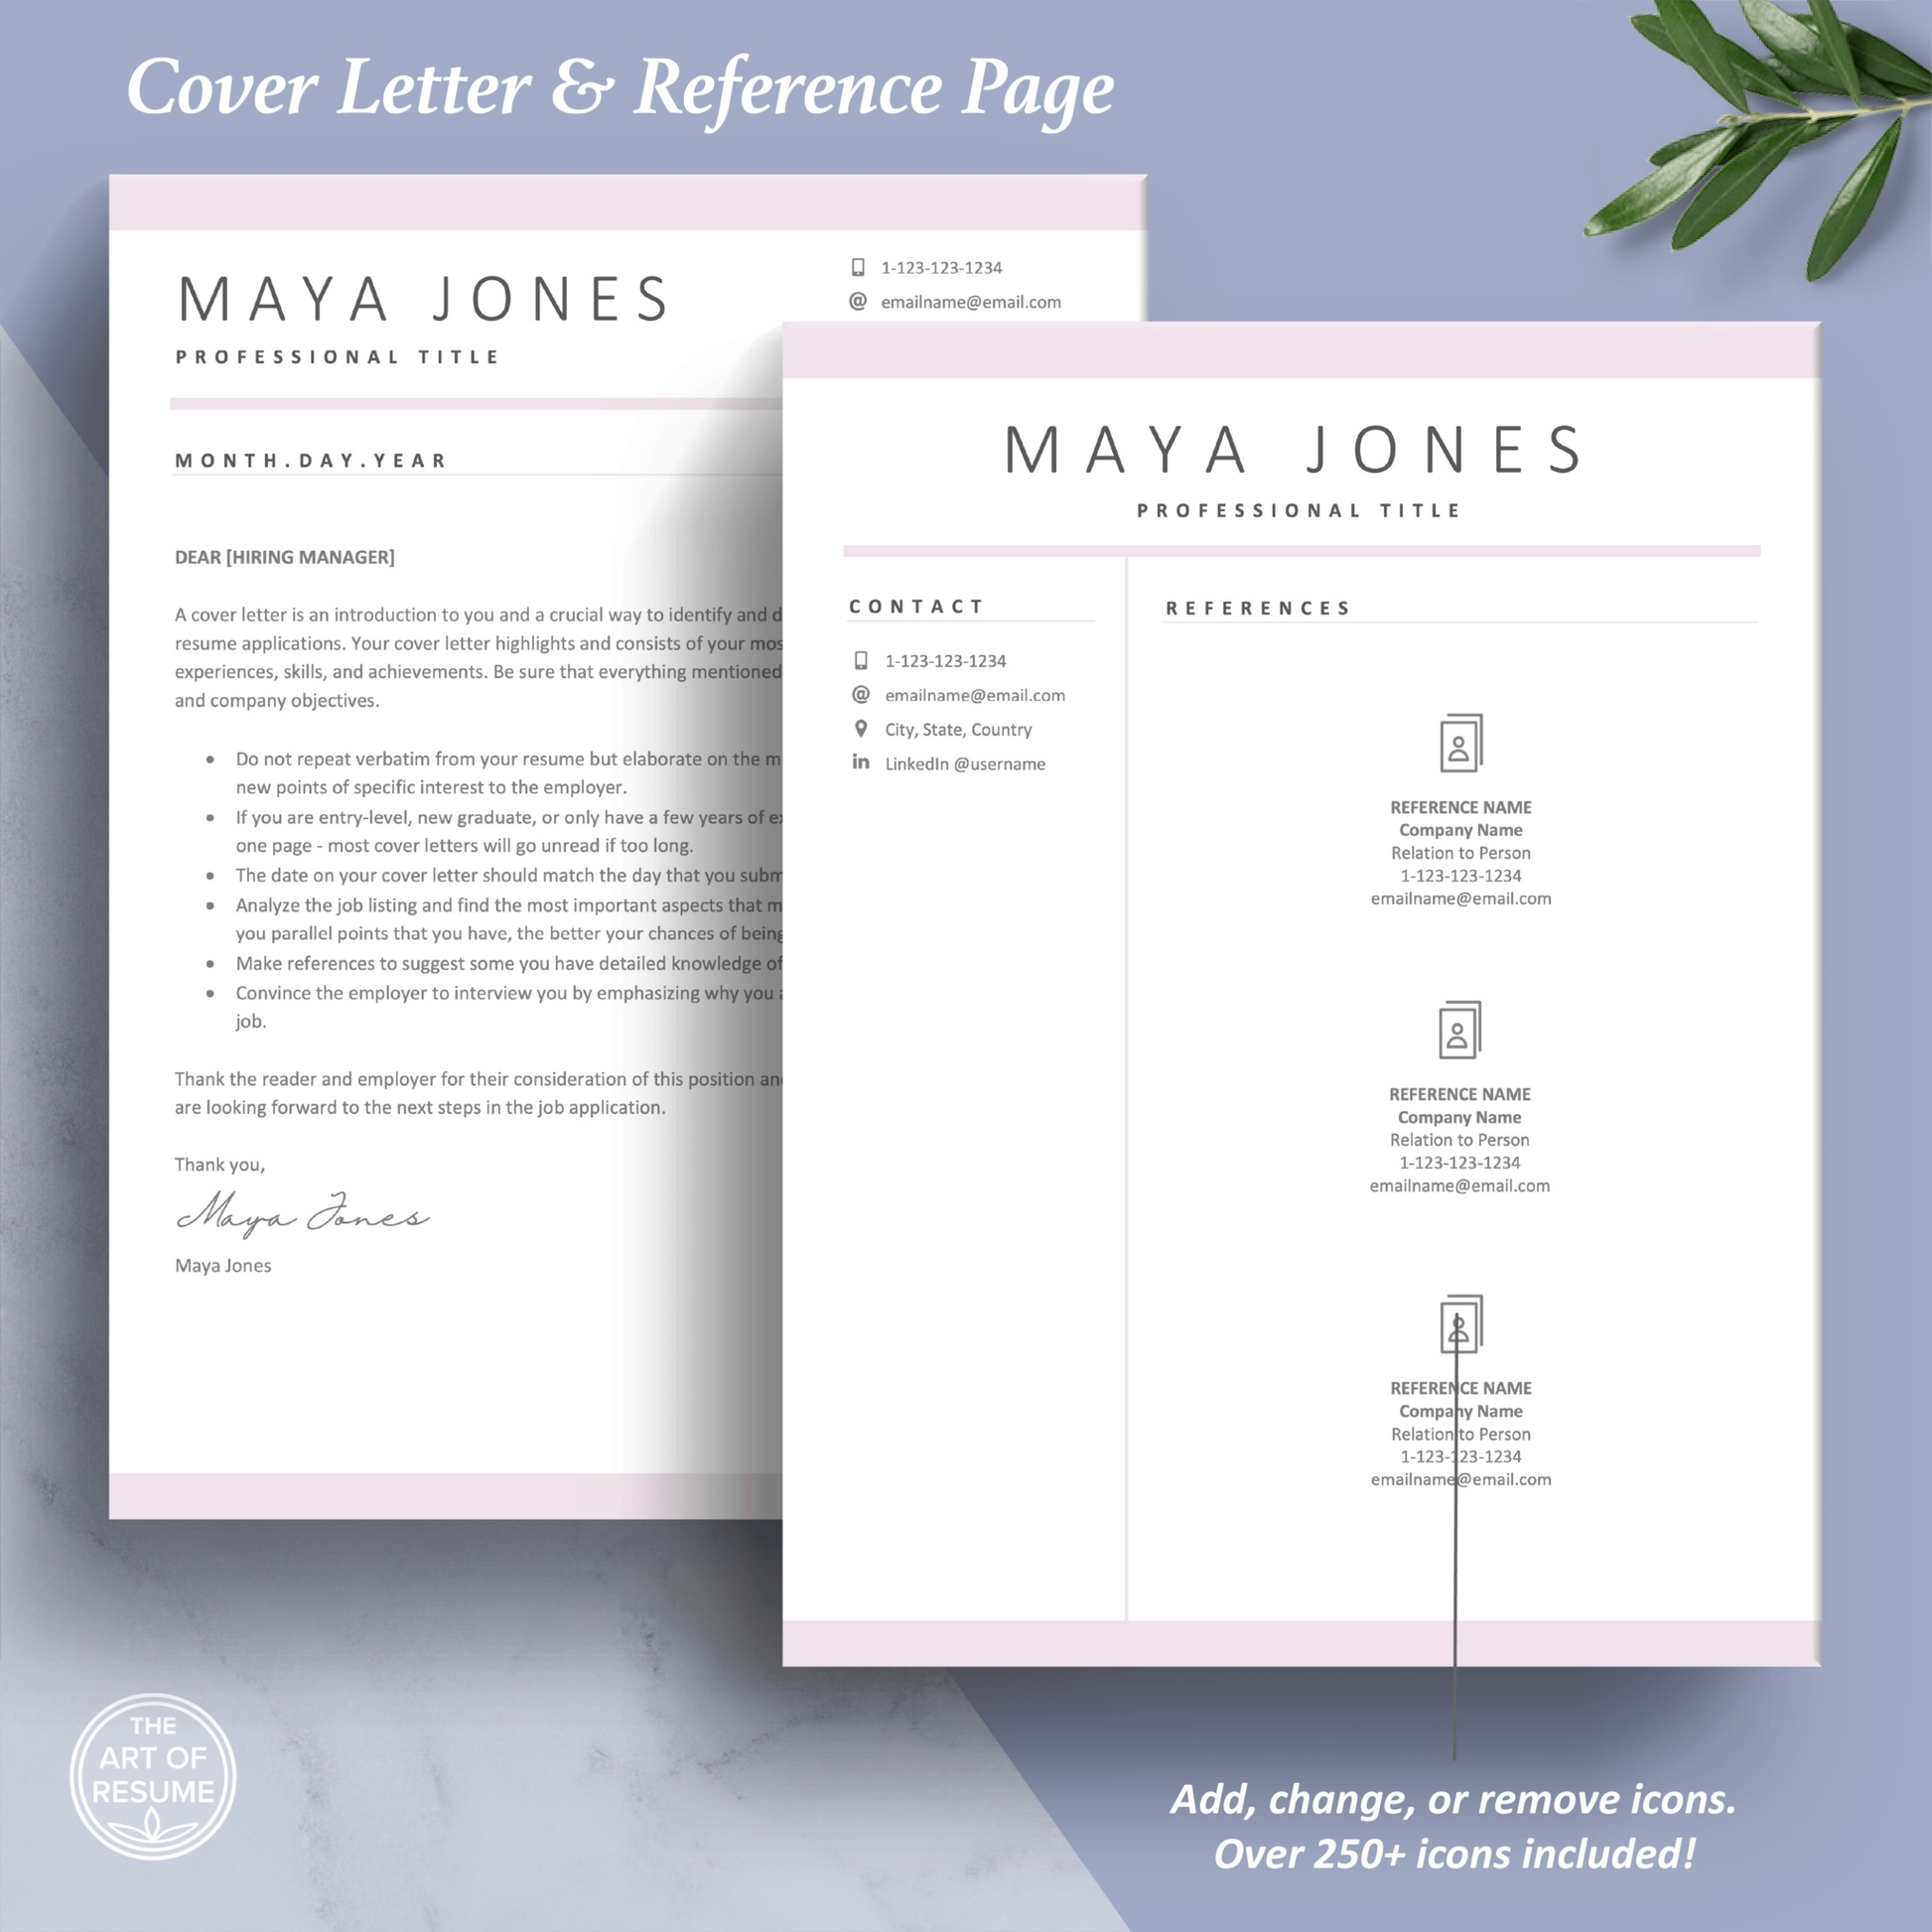 The Art of Resume Templates | Professional Pink Cover Letter and Reference Page Templates Download